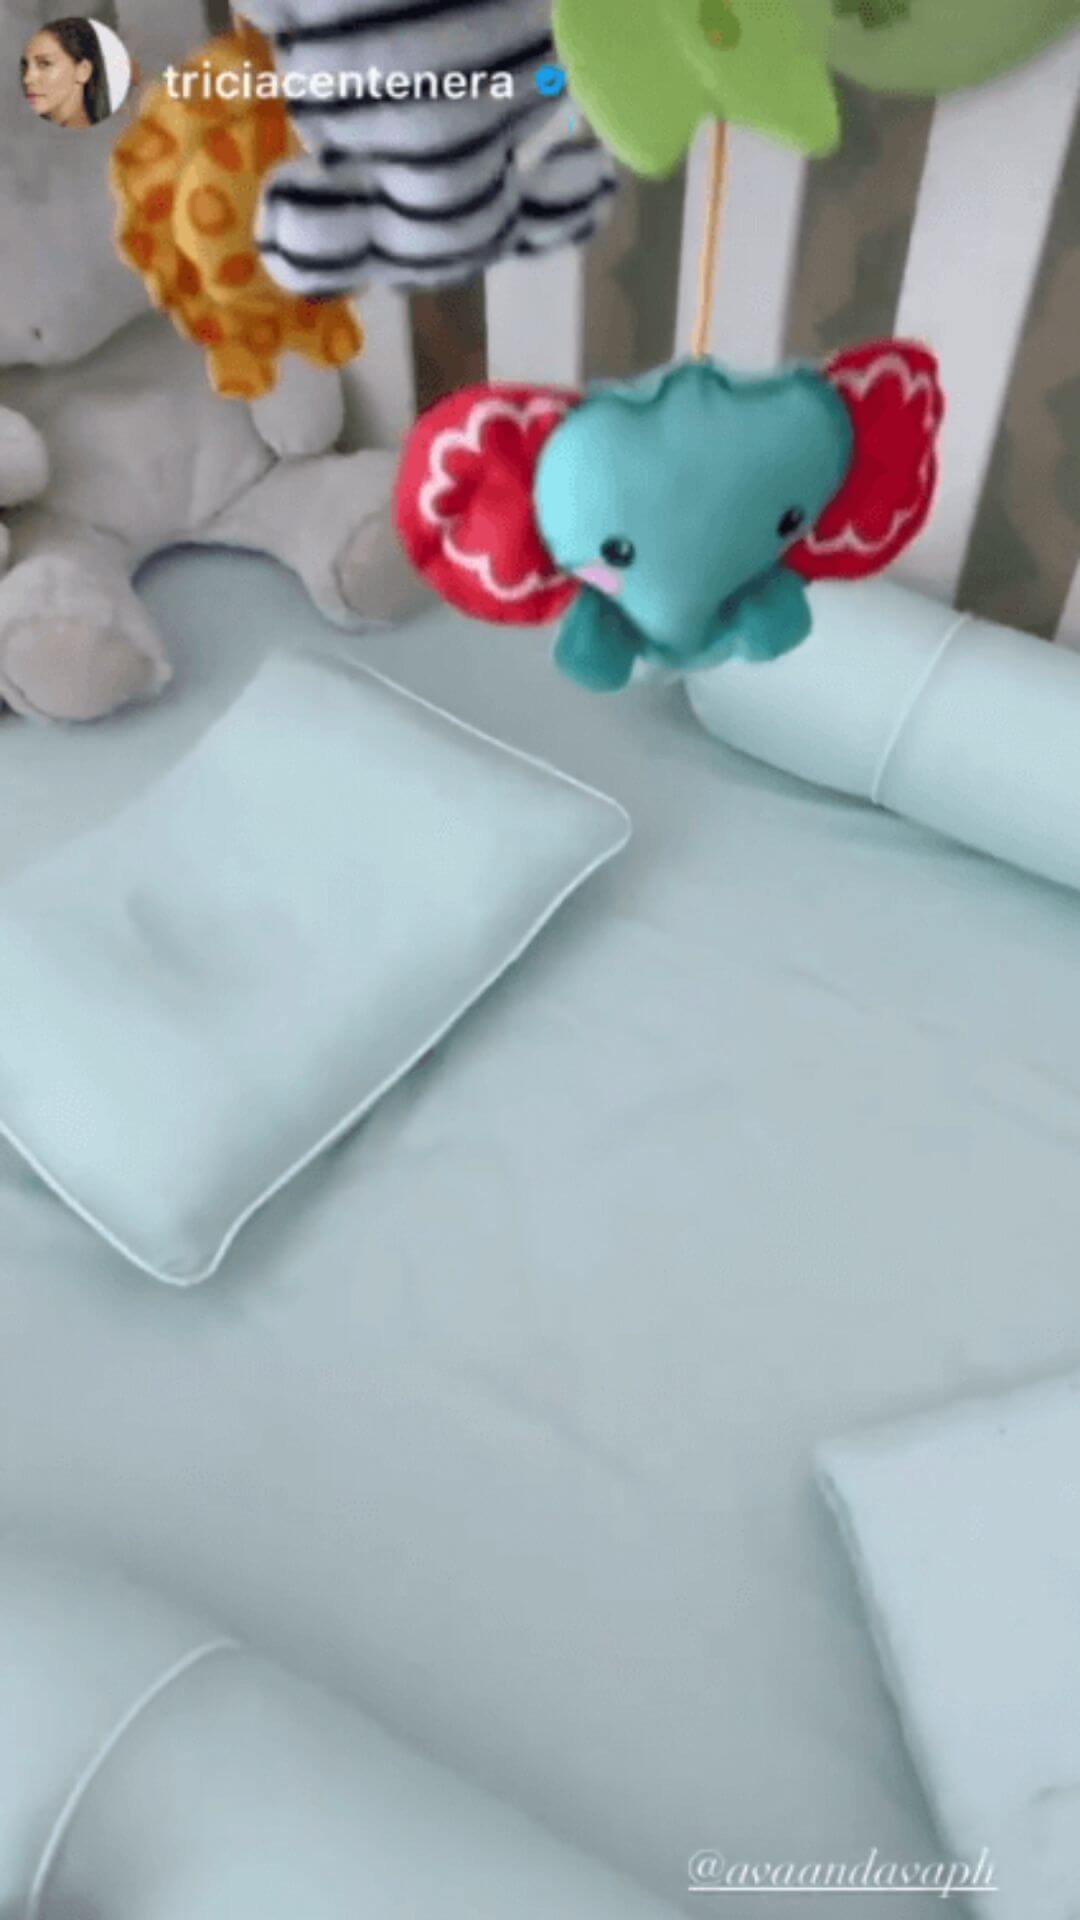 ava and ava ph review - buttery breathable soft organic bamboo lyocell baby bedding set (fitted crib sheet, pillowcases, pillows) in mint green by tricia centenera